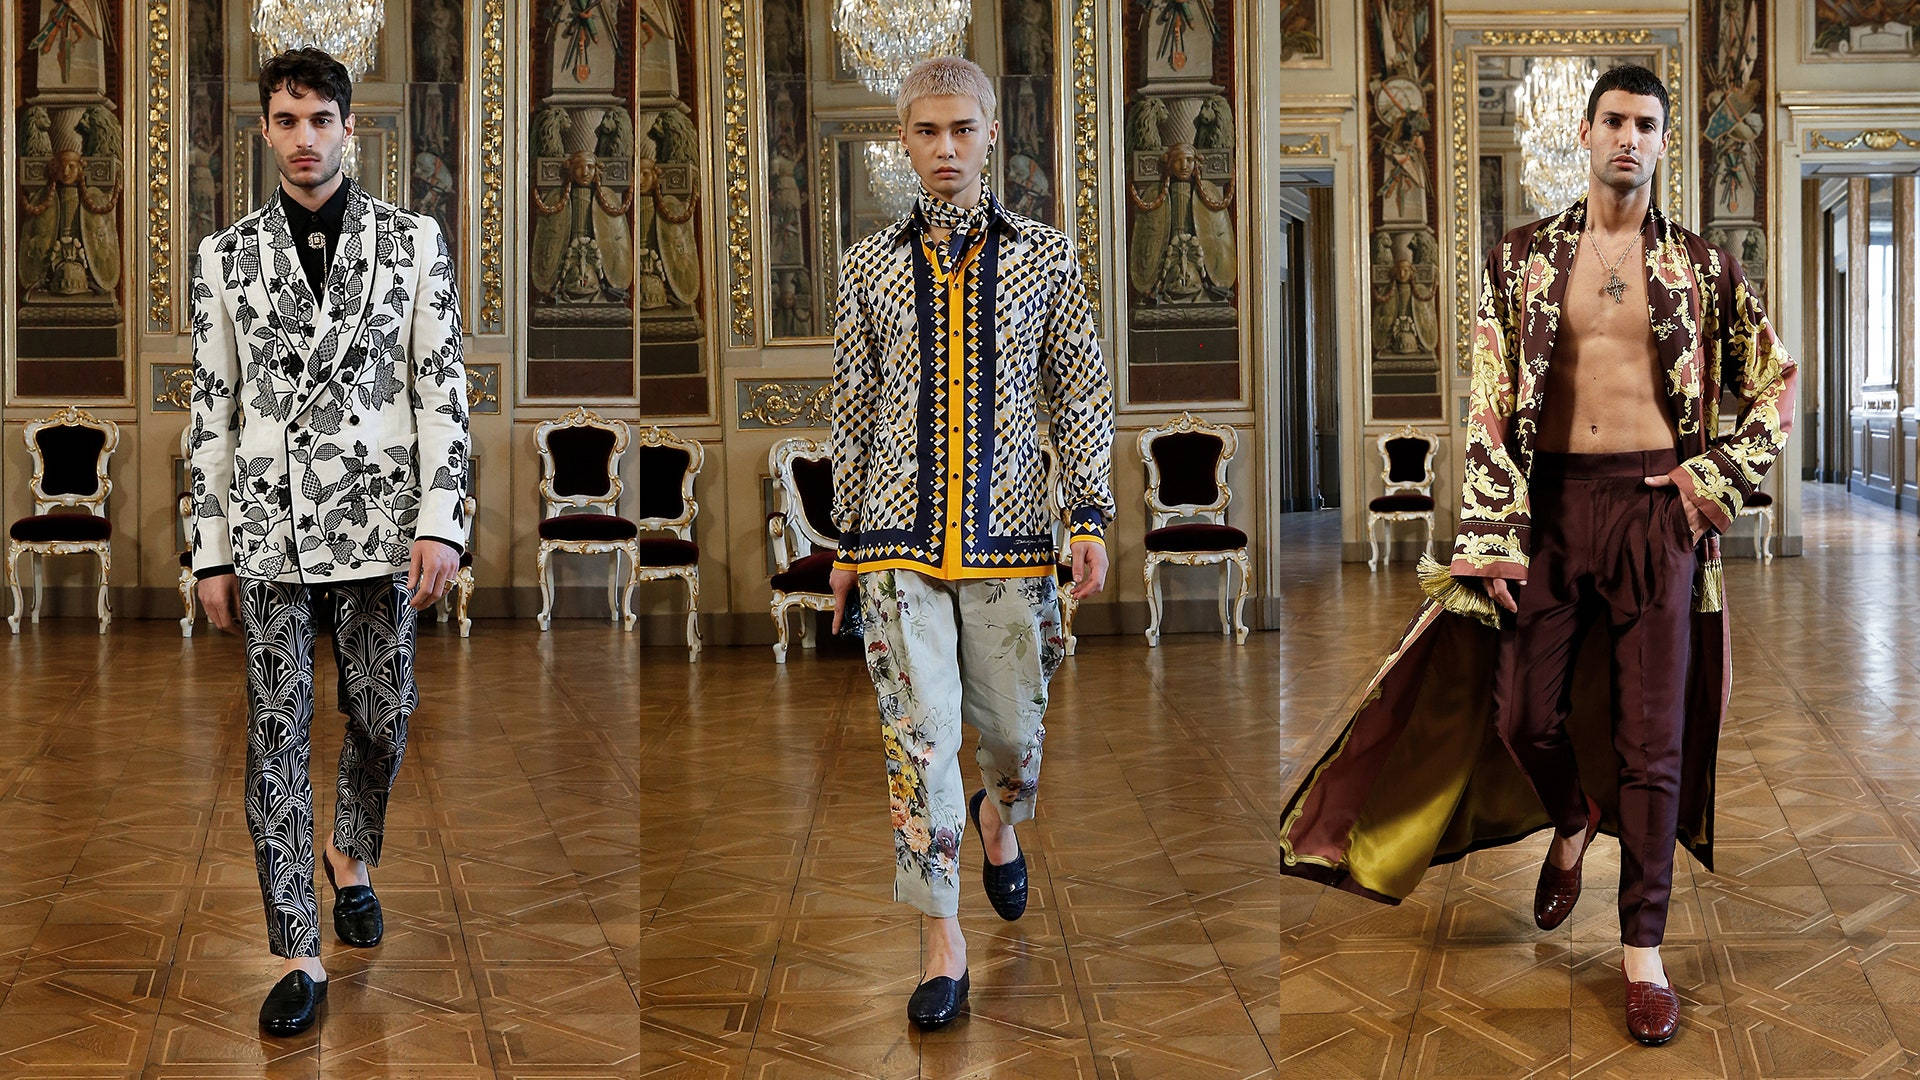 Male Dolce And Gabbana Models With Regal Clothing Wallpaper